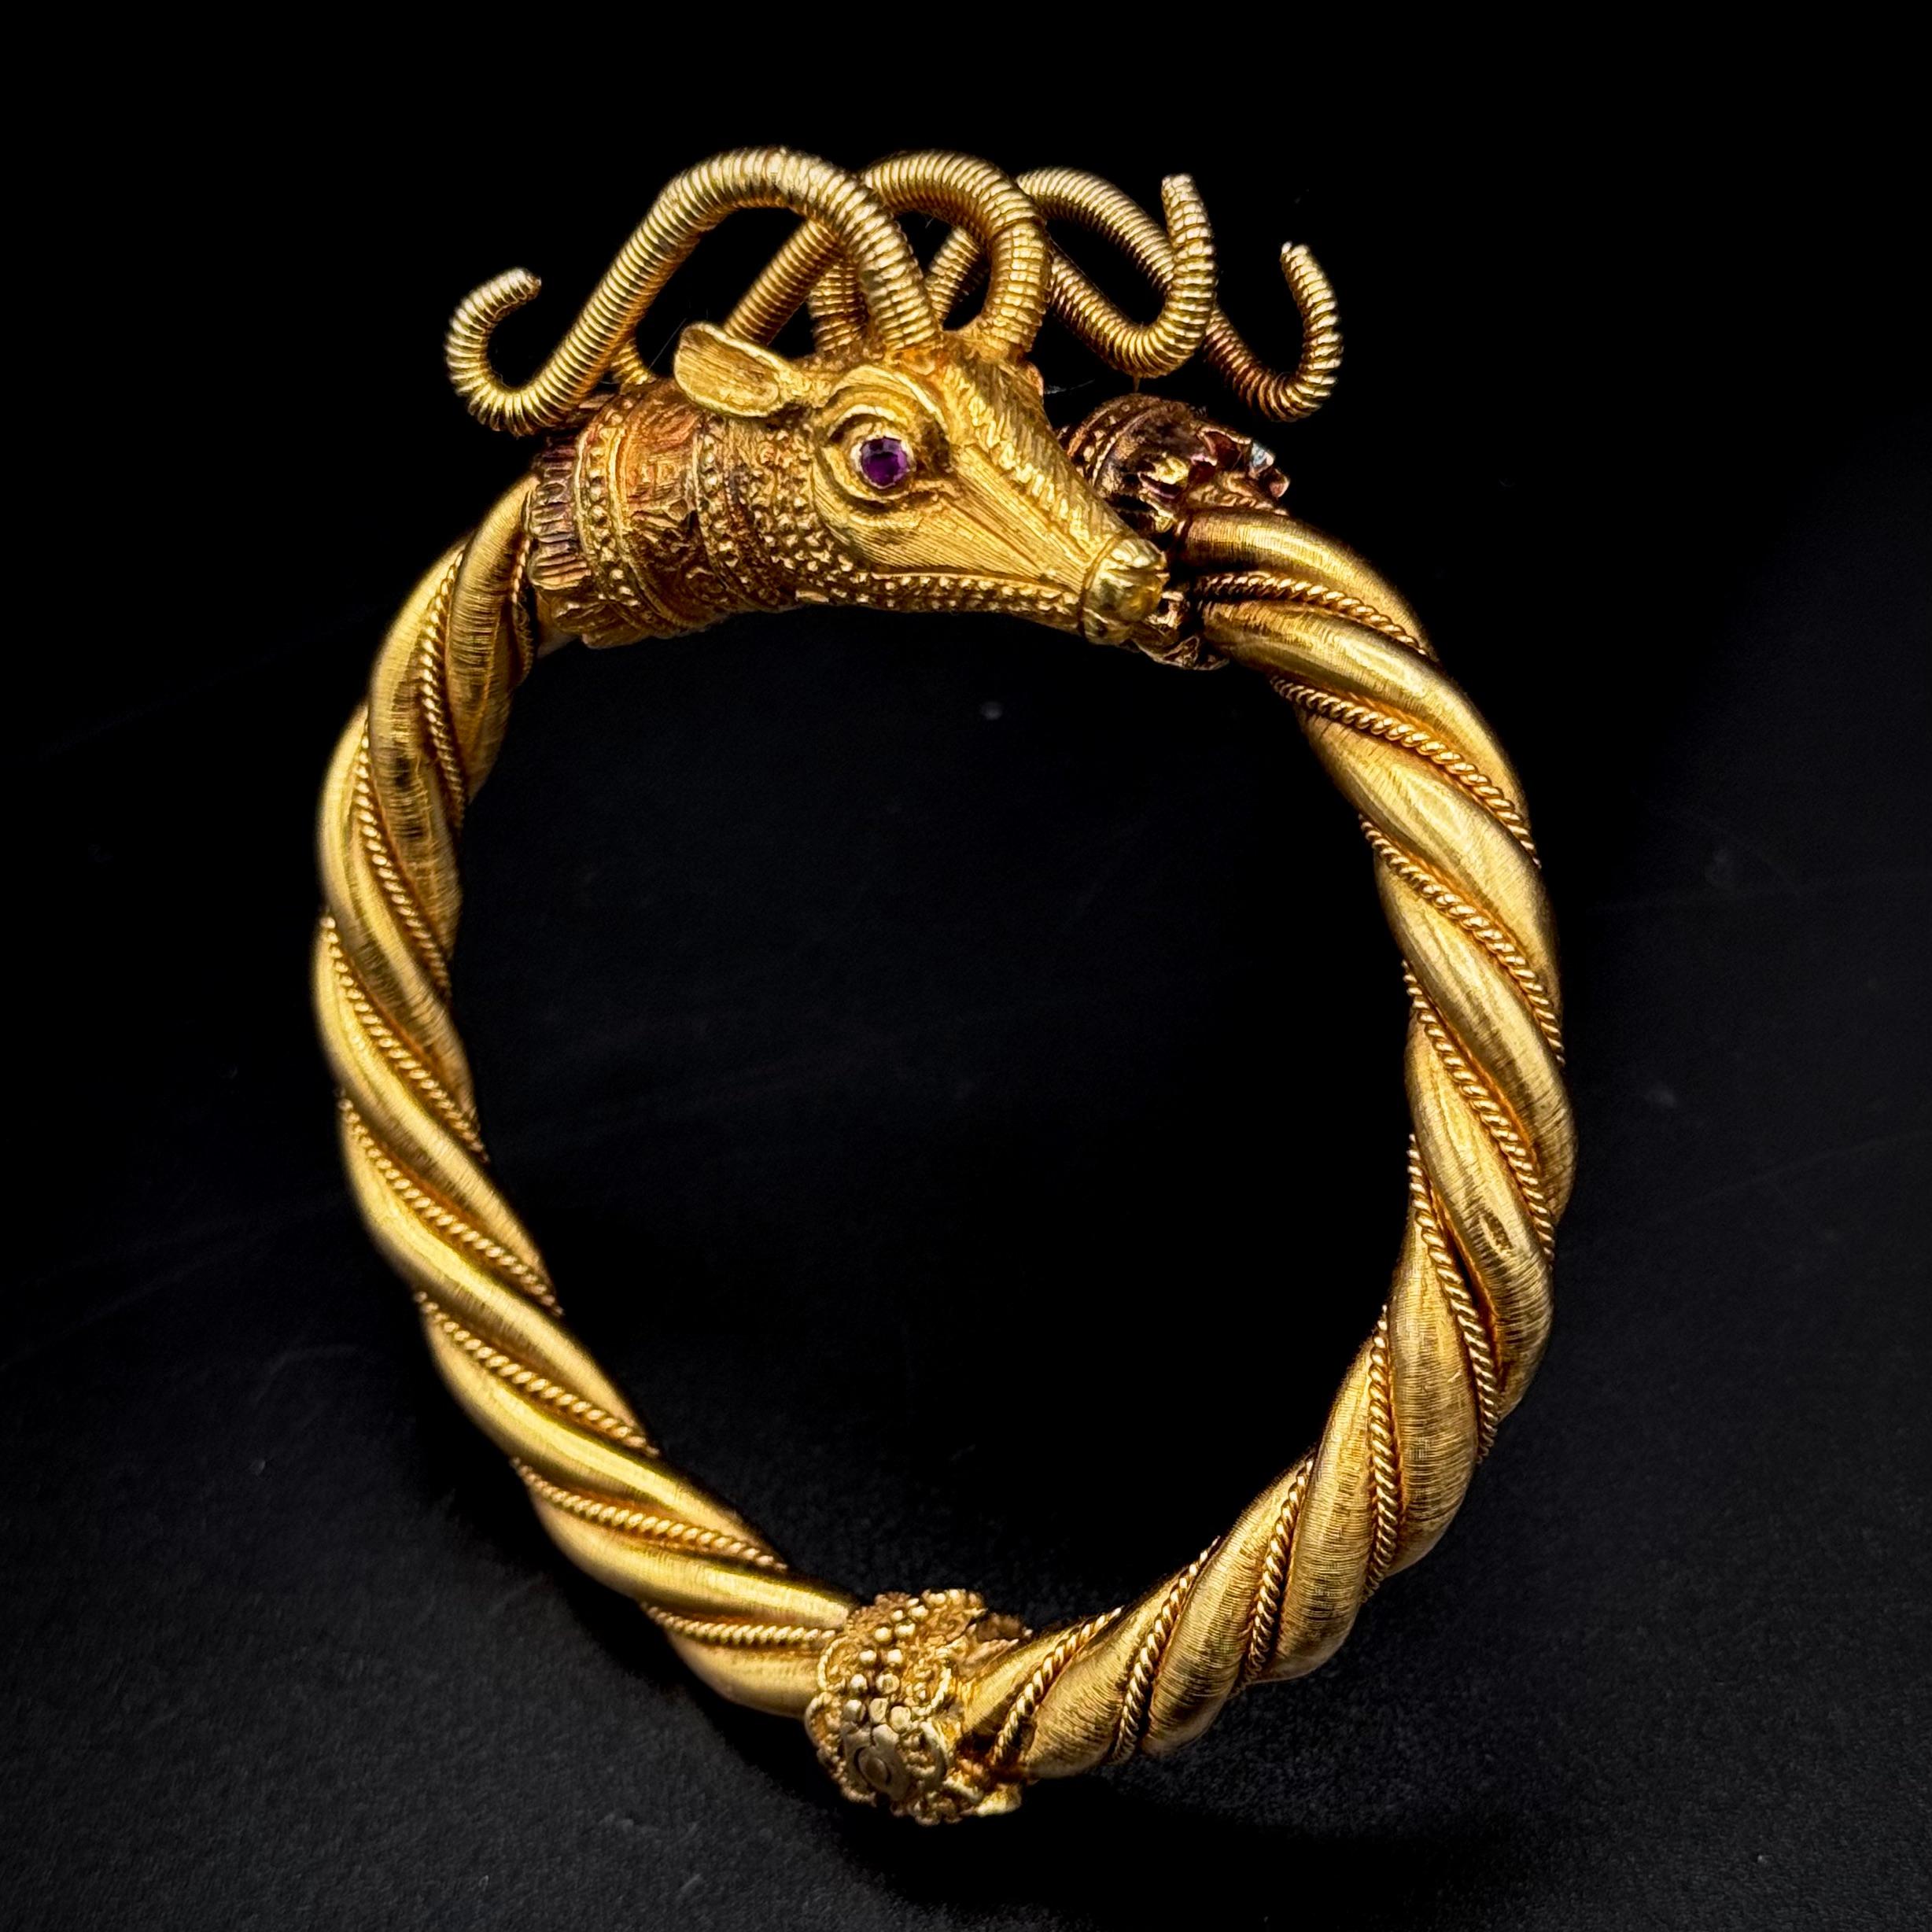 Lalaounis vintage double ram’s head ruby bangle bracelet in 18kt yellow gold, Greece, 1970s. This hinged open bangle is modelled as two opposing textured and carved ram heads accented with circular-shape ruby eyes, each issuing a twisted neck